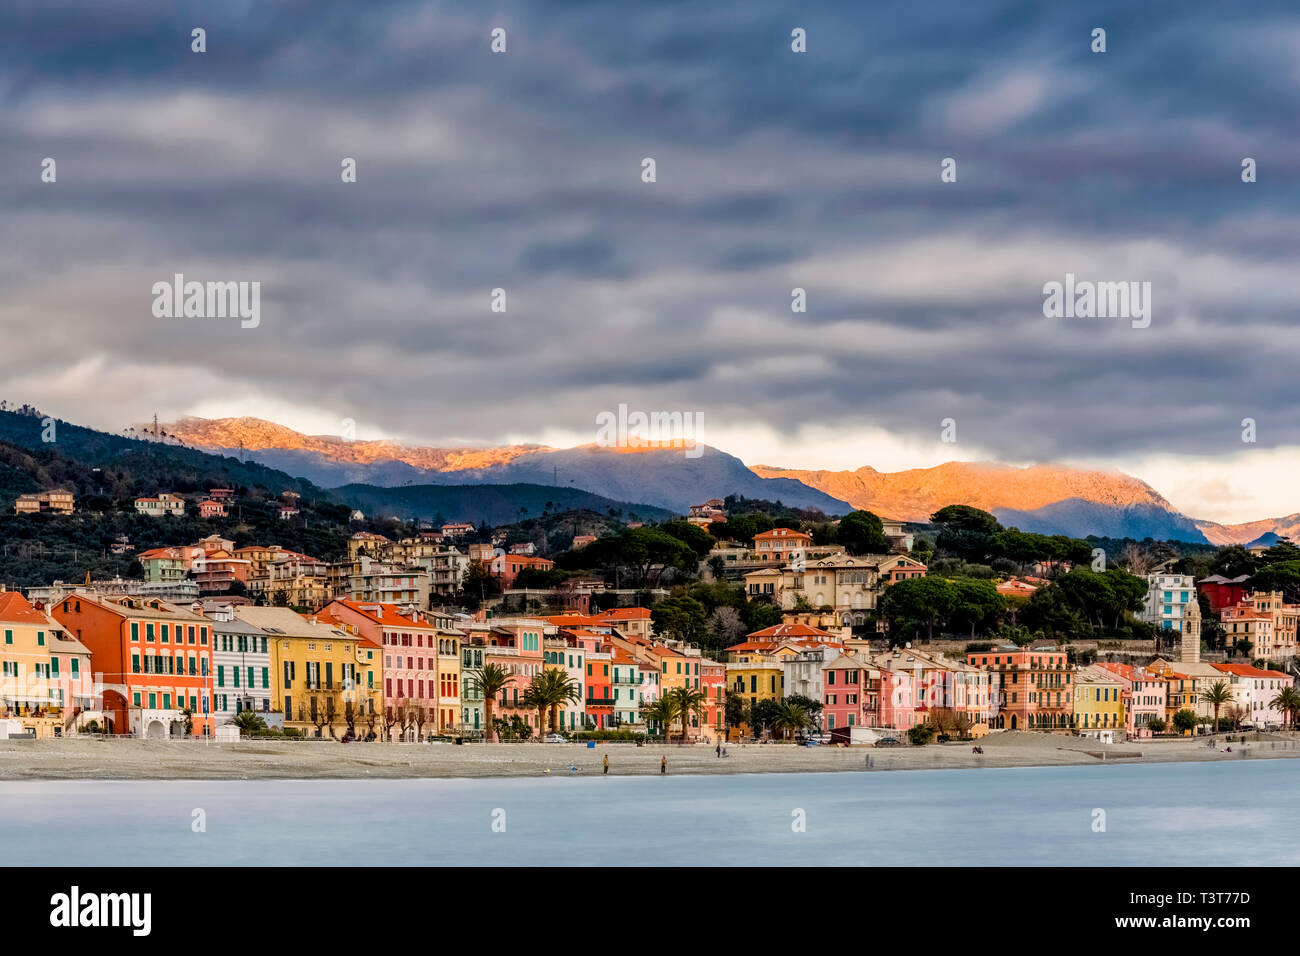 Celle Ligure speldido village in the province of Savona, on the western Ligurian coast overlooking the beaches directly on the sea dominated by the Apennine peak of the Beigua Park Stock Photo